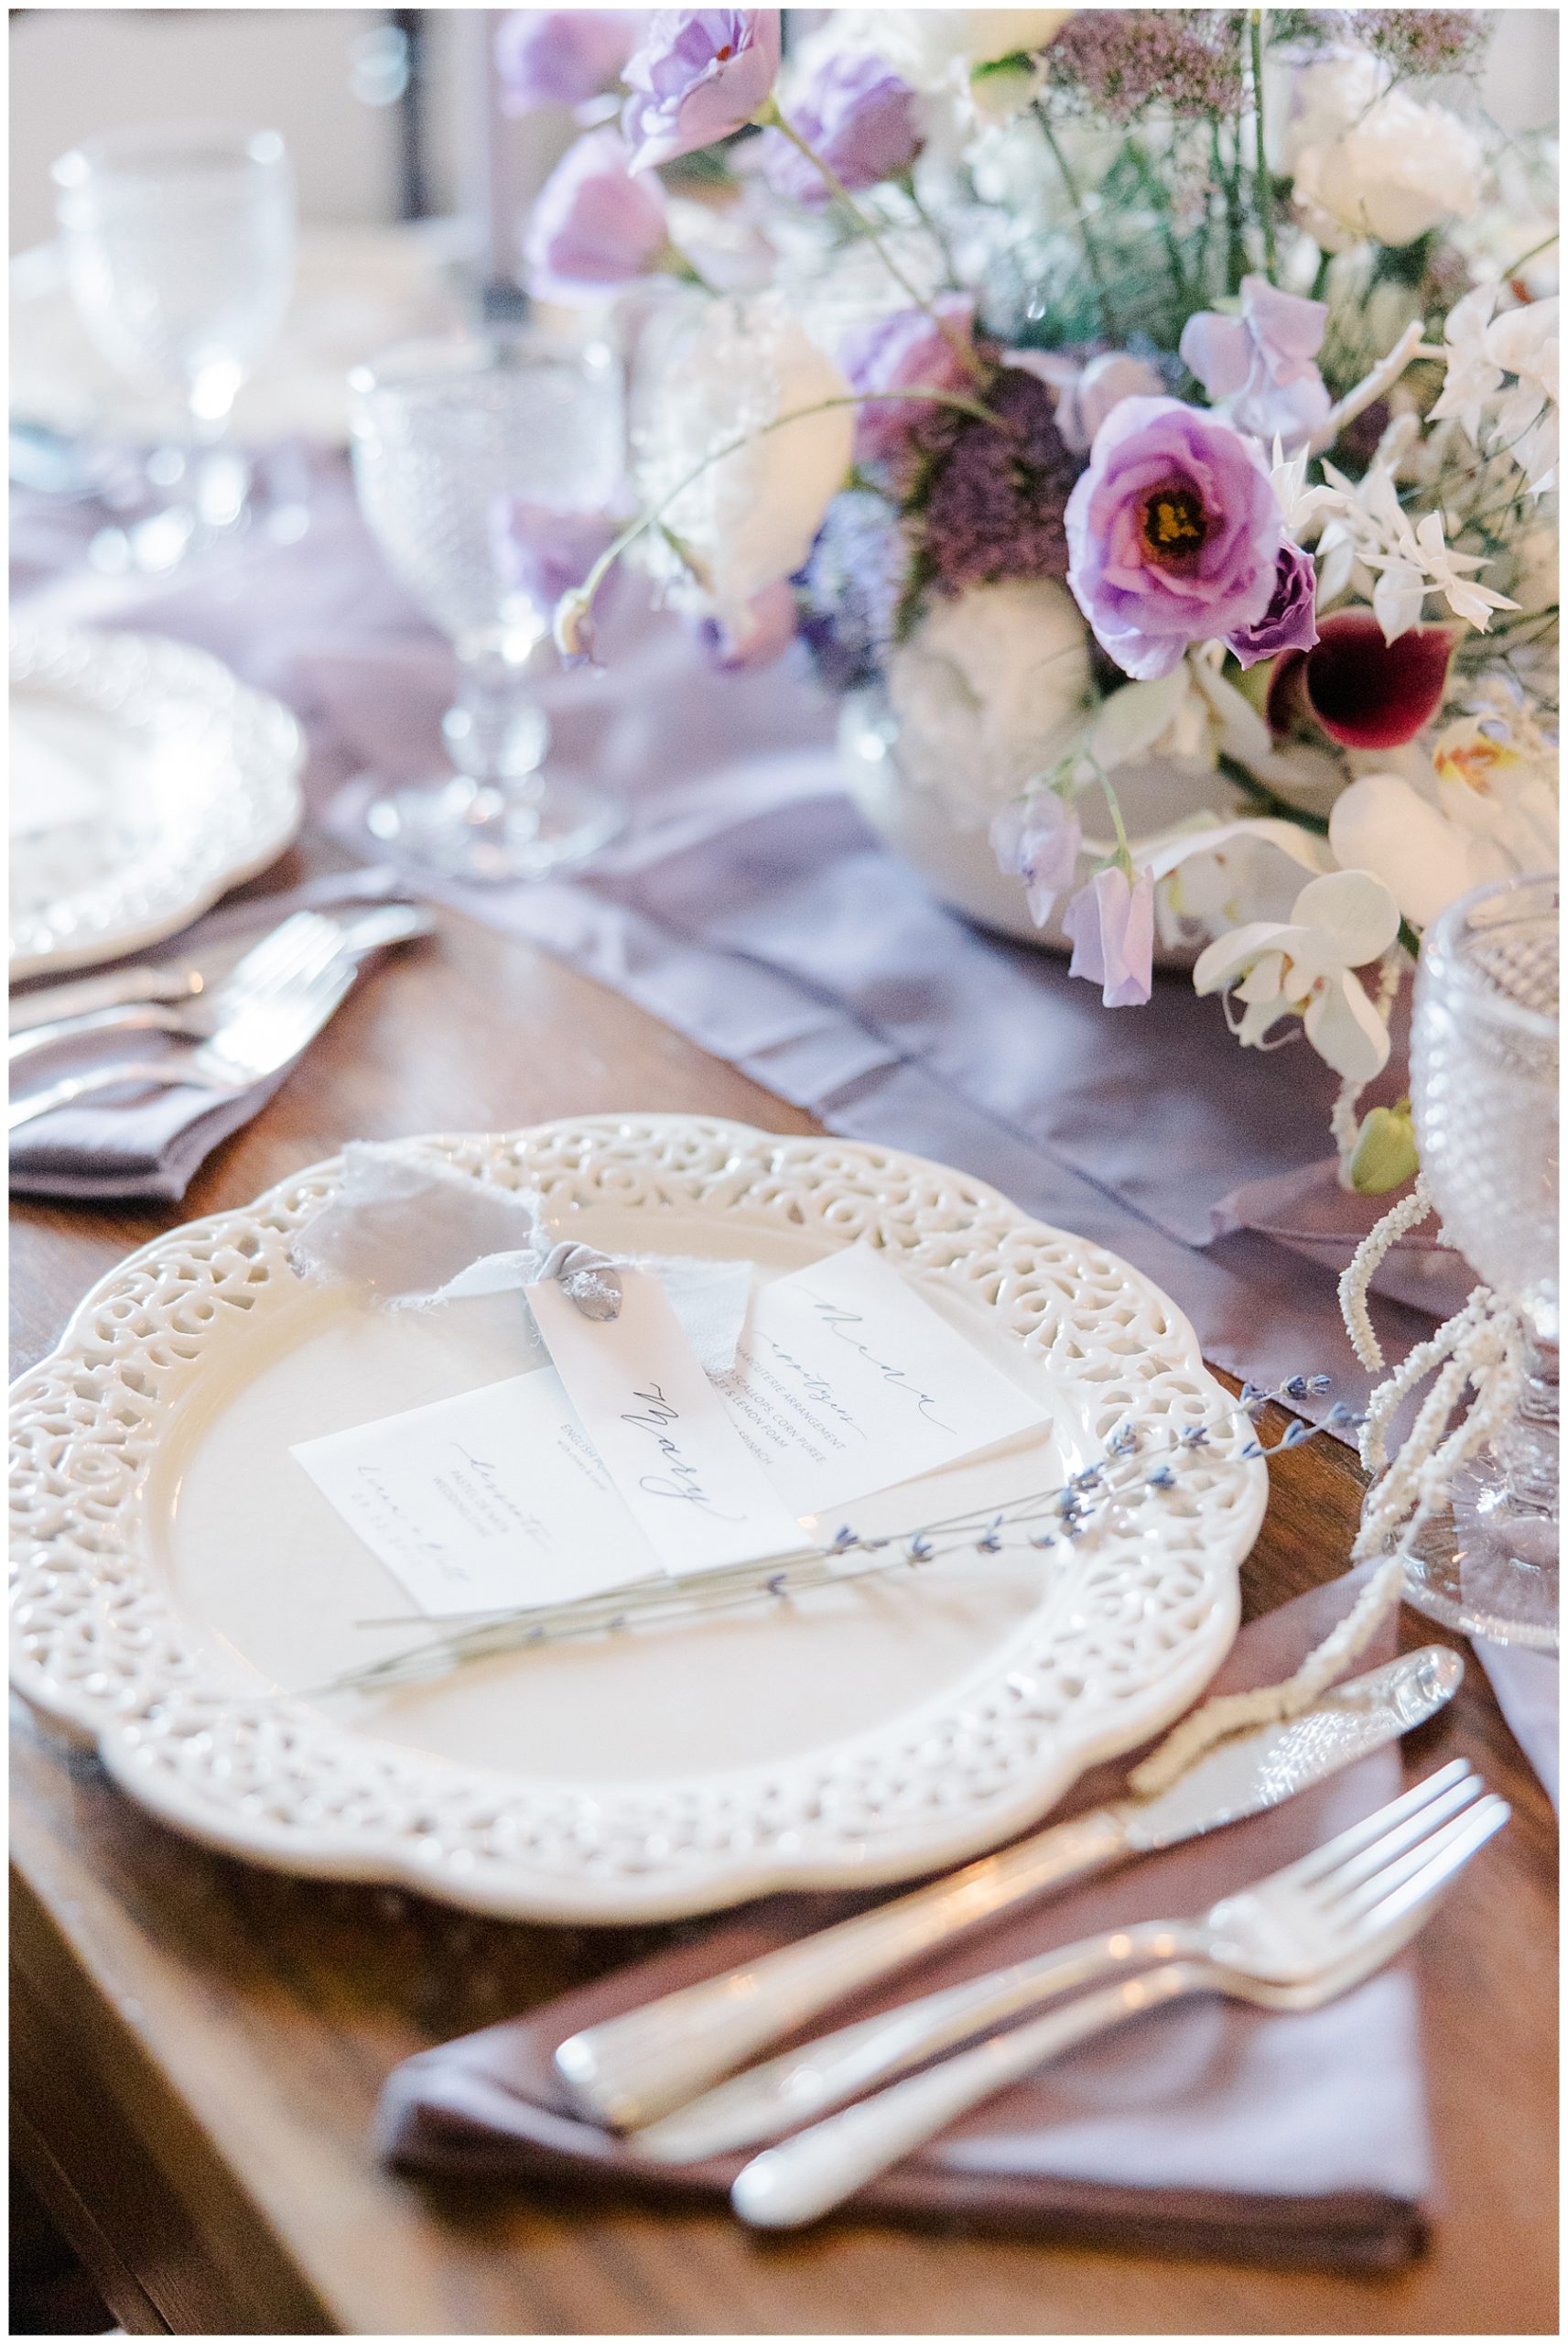 romantic table setting from wedding dinner in Portugal 